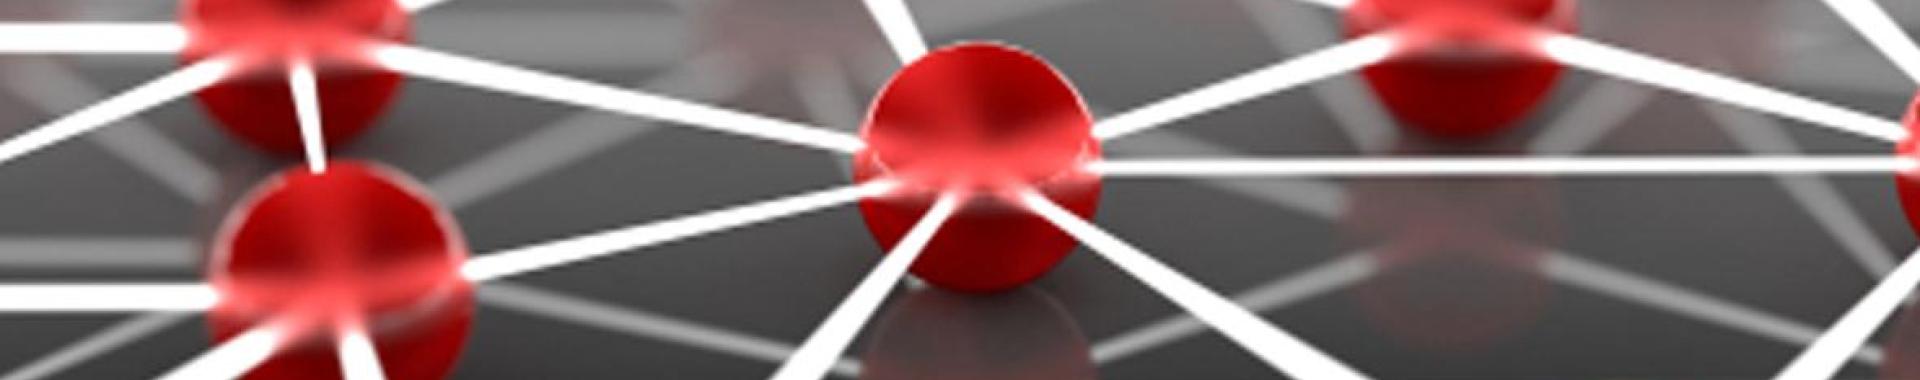 Illustration of network of connected red spheres connected with white lines on a reflective surface.